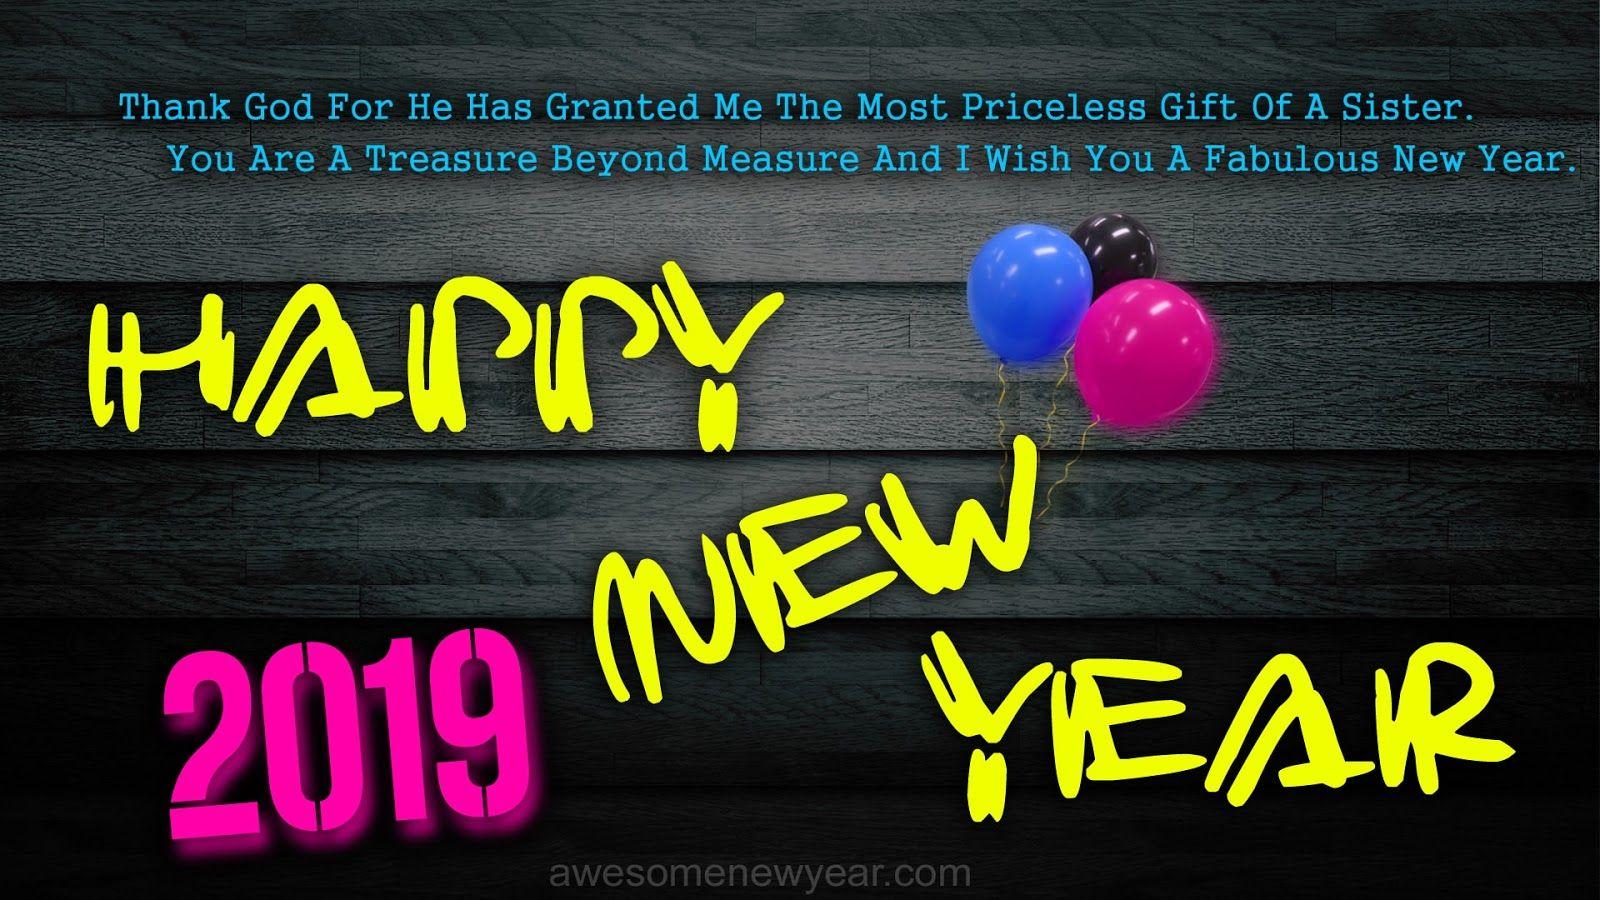 Happy New Year 2019 Quotes for Sister. Latest New Year Wishes